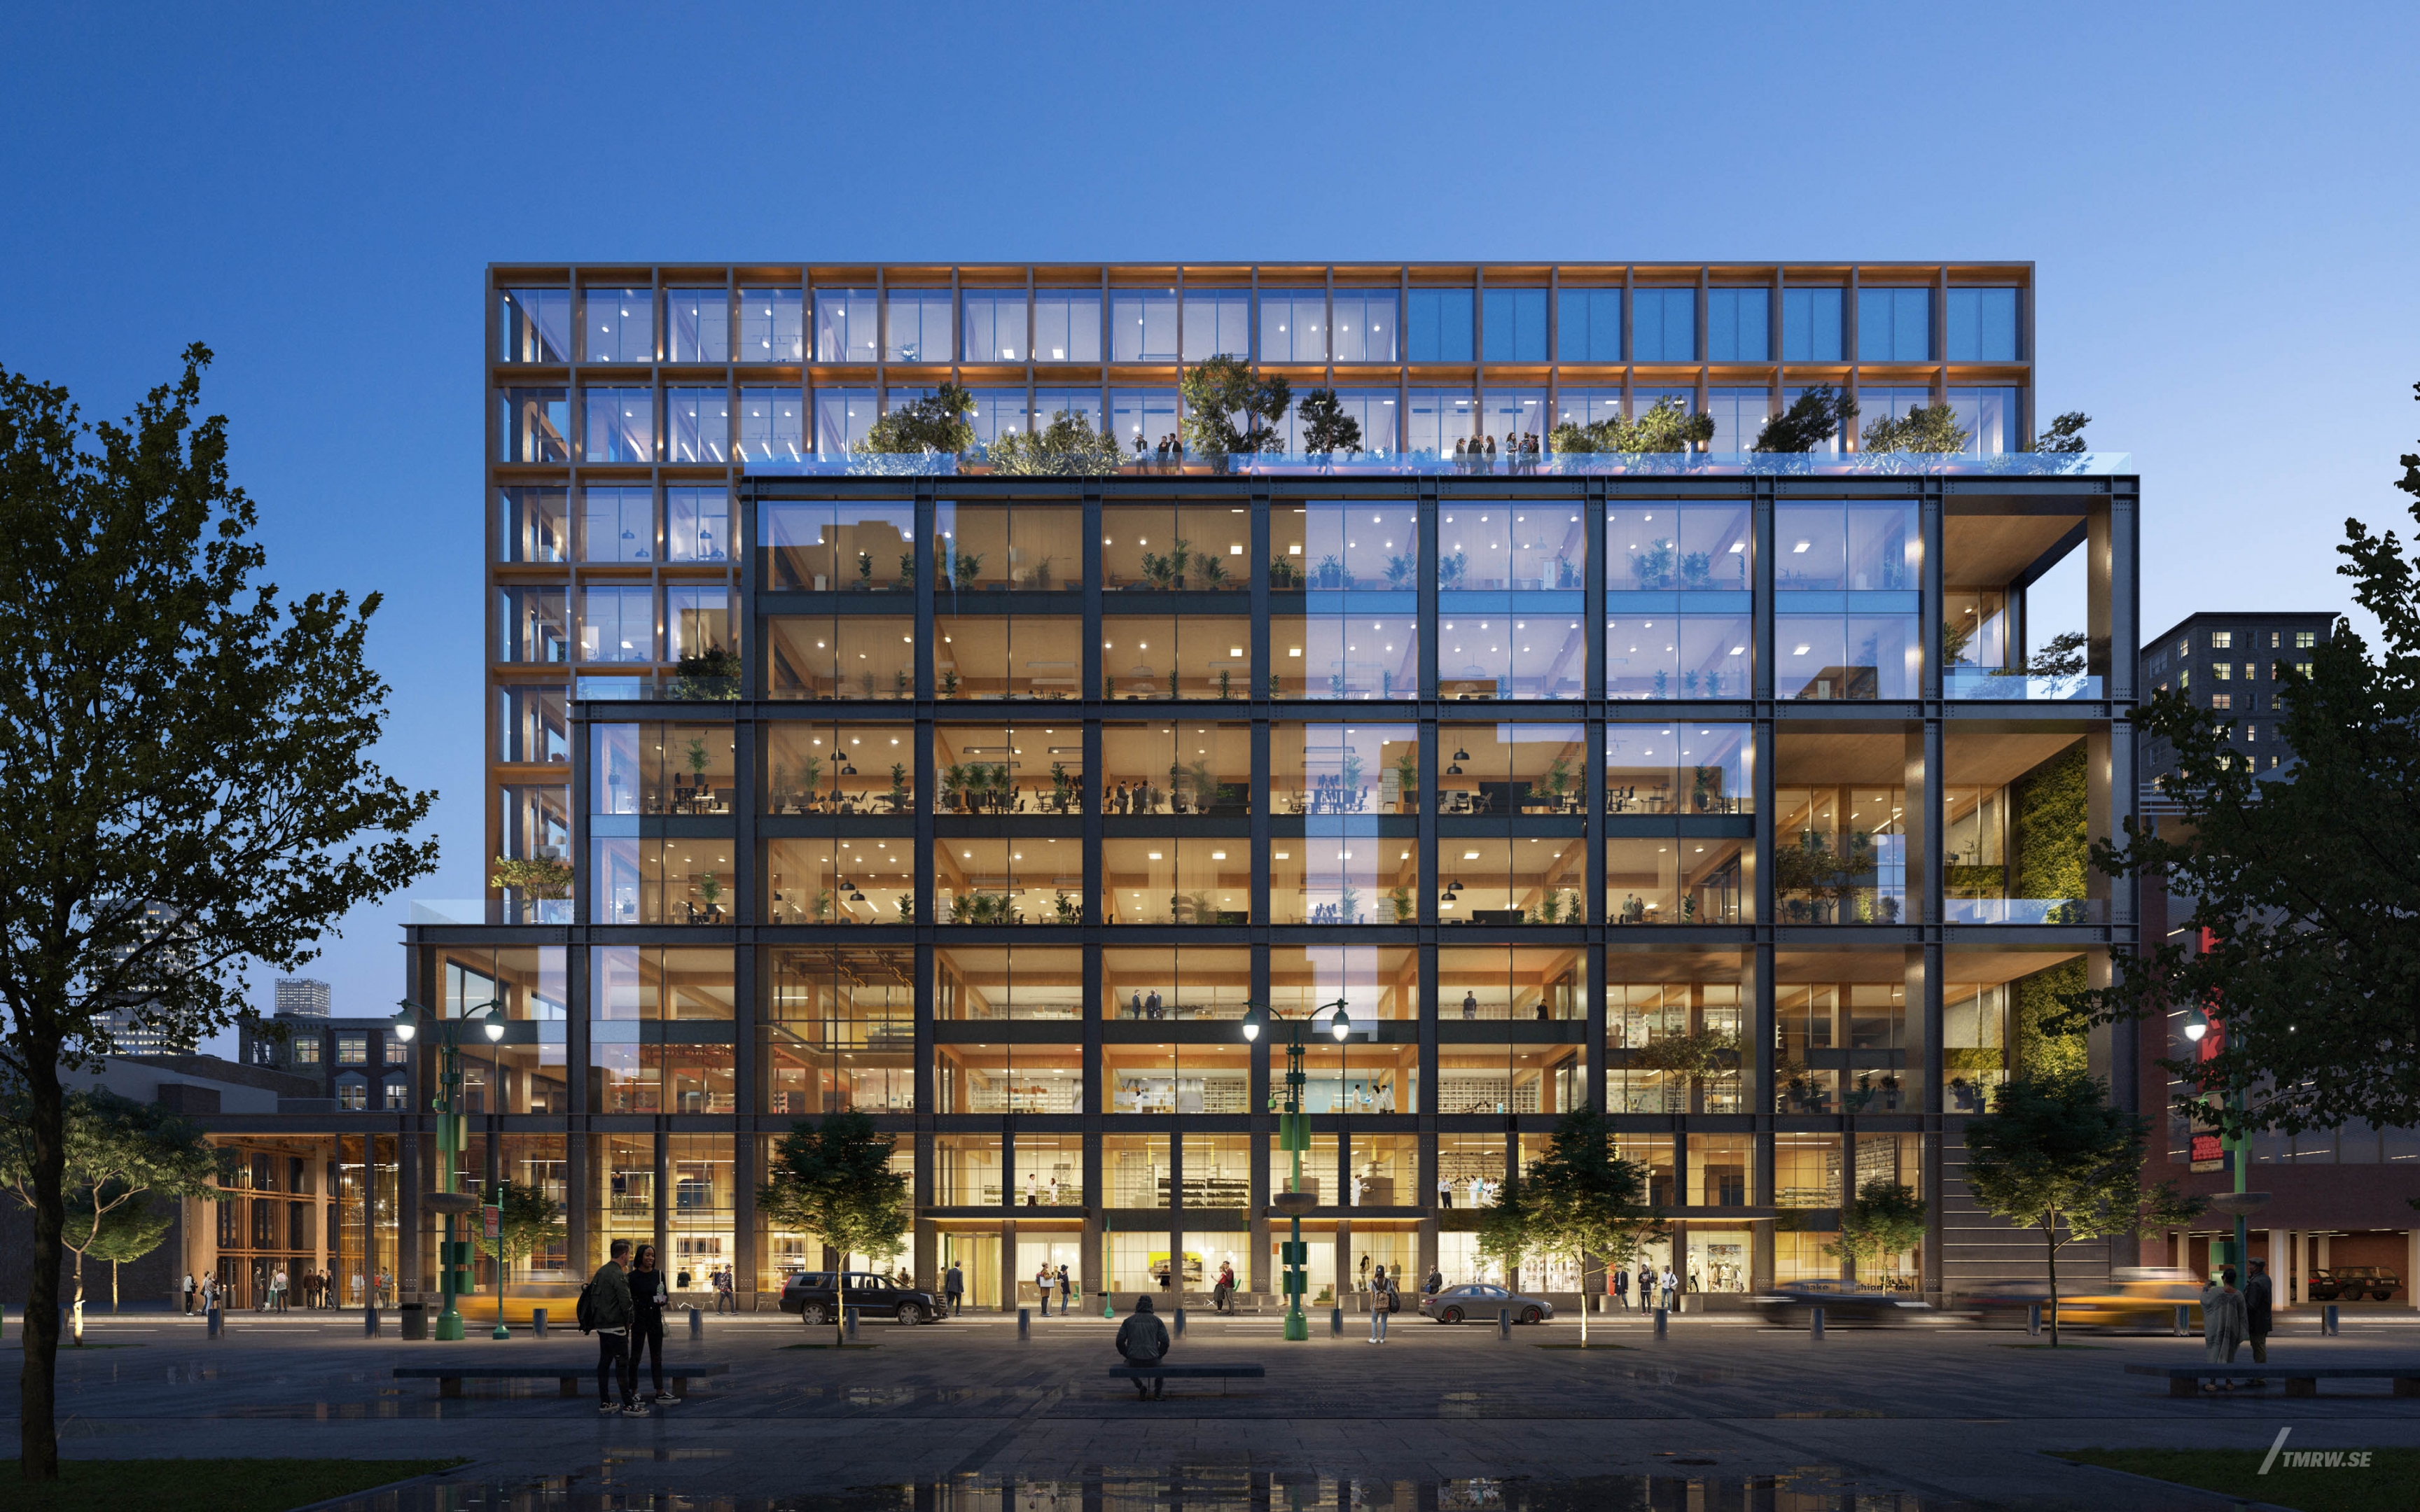 Architectural visualization of 320 West 31 Front for KPF, an Office building during night from a street view.